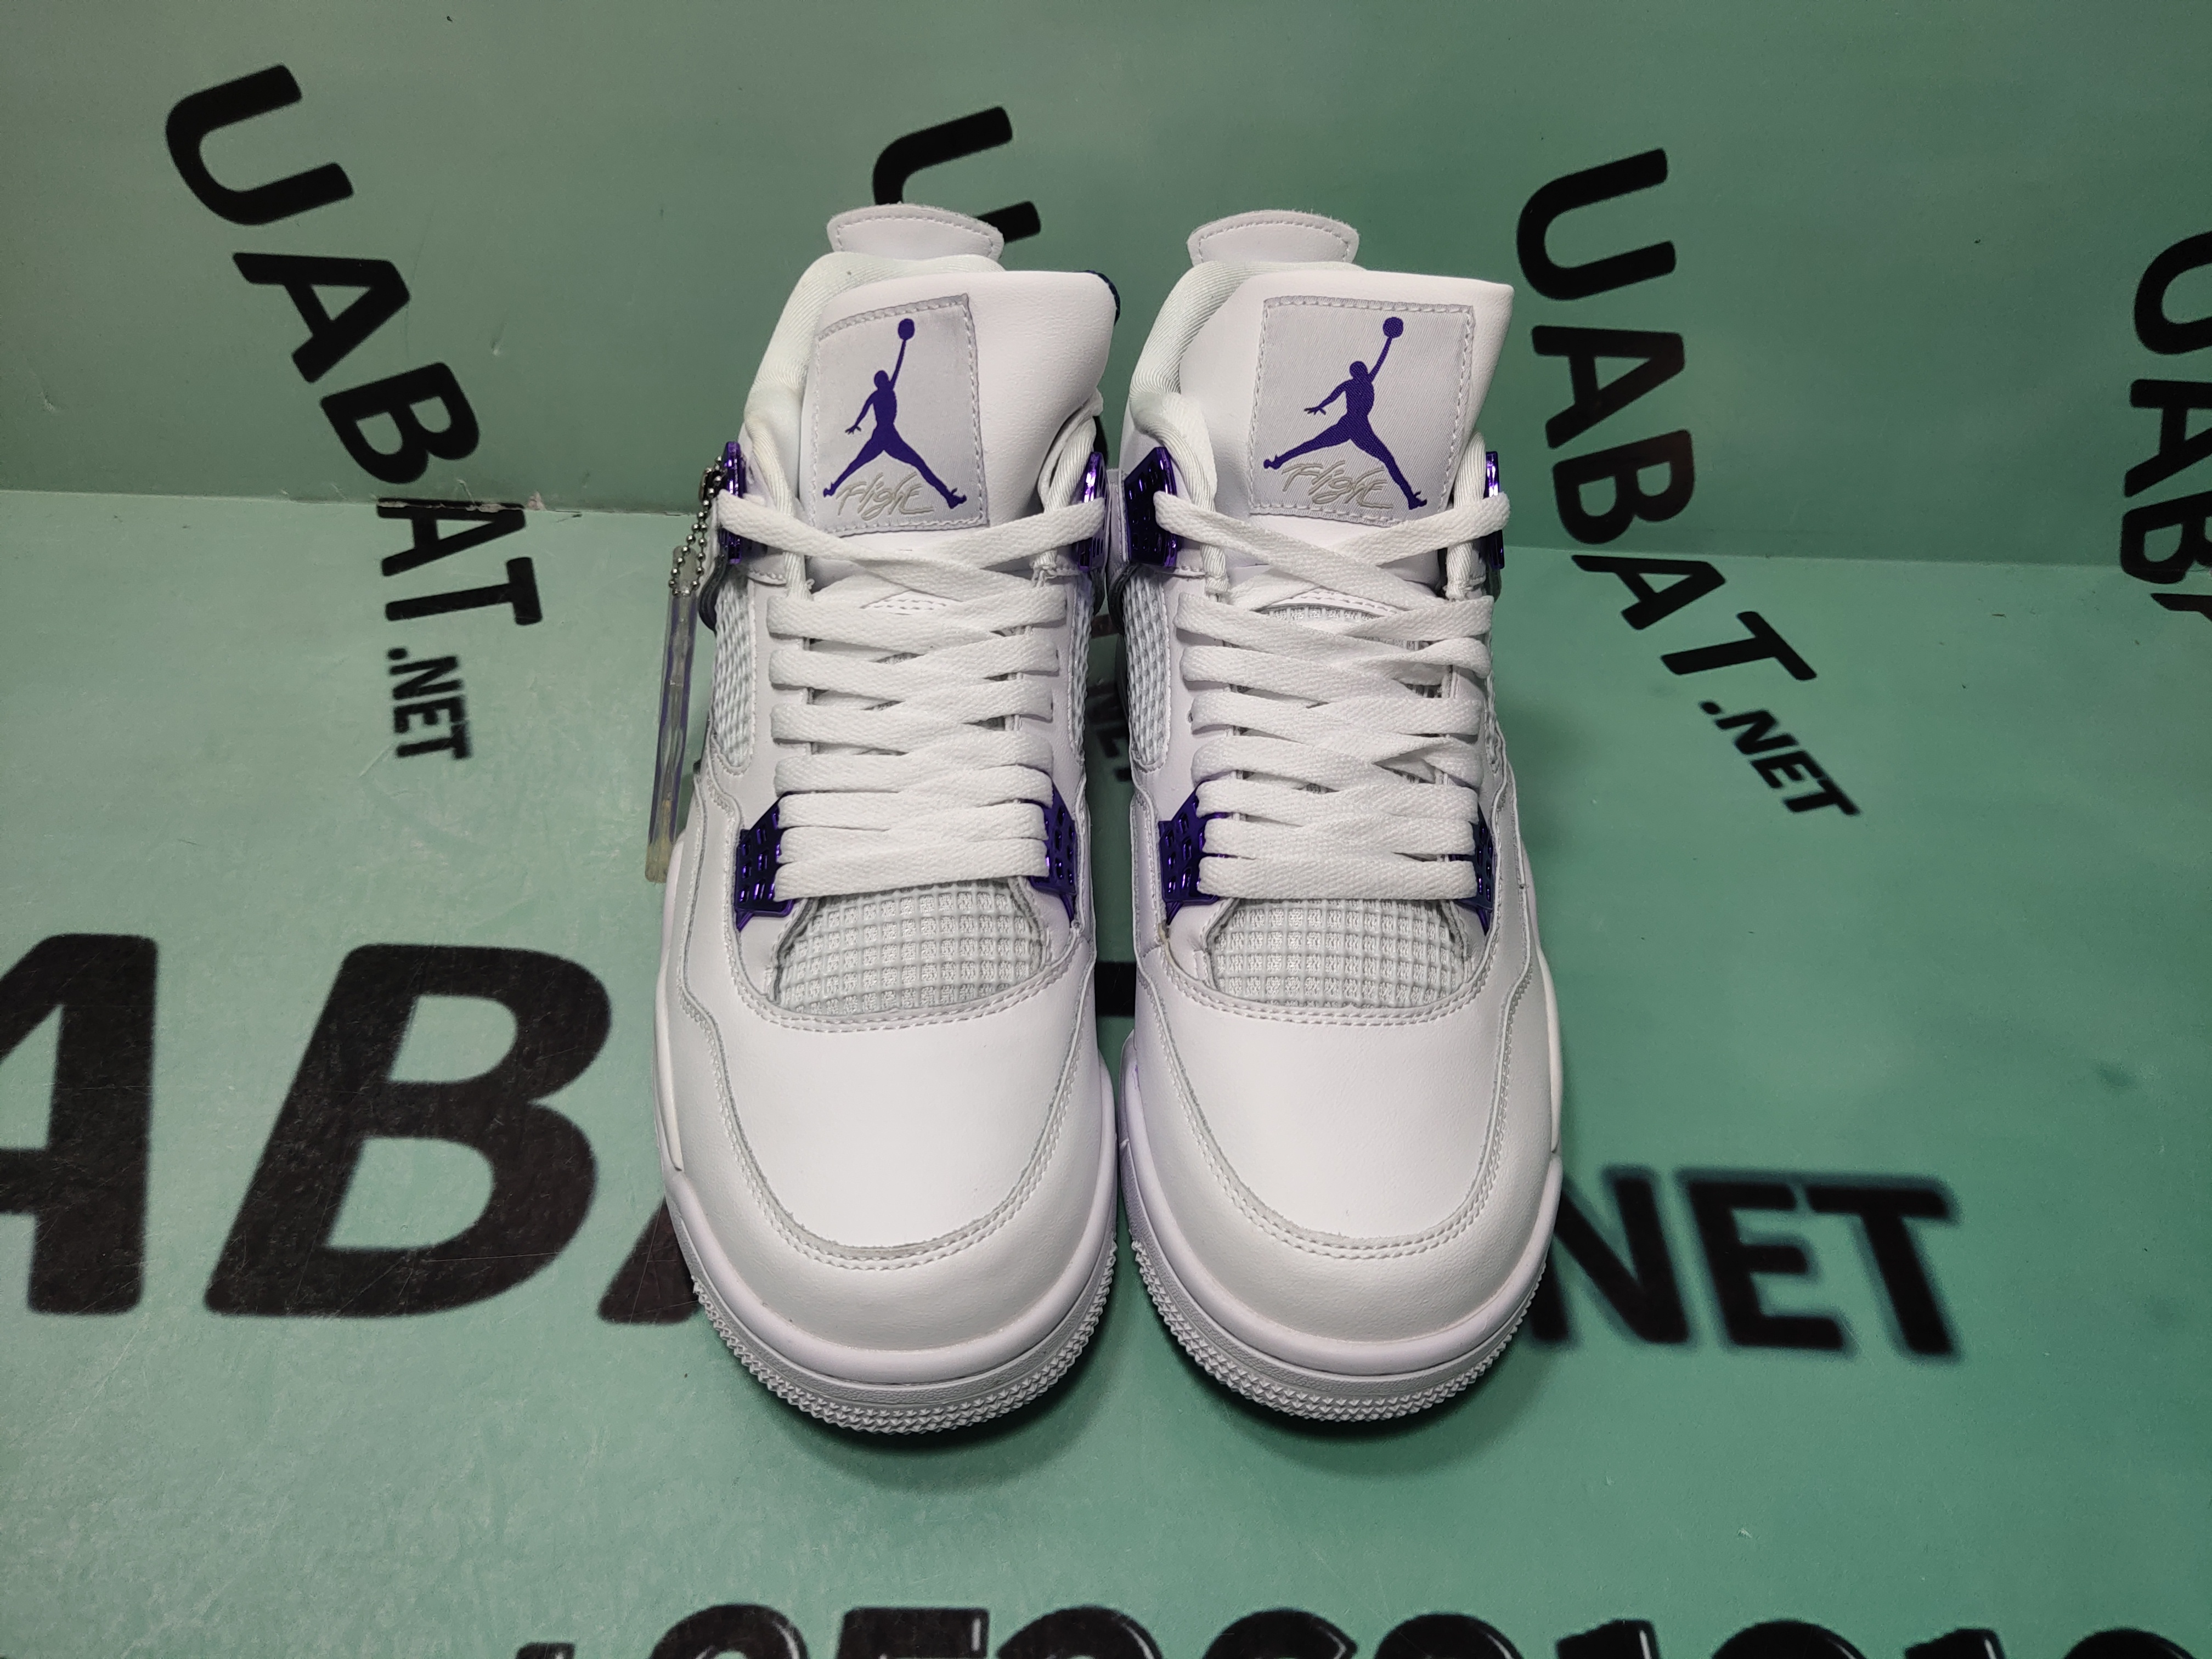 Jordan Brand spares no mercy as yet another